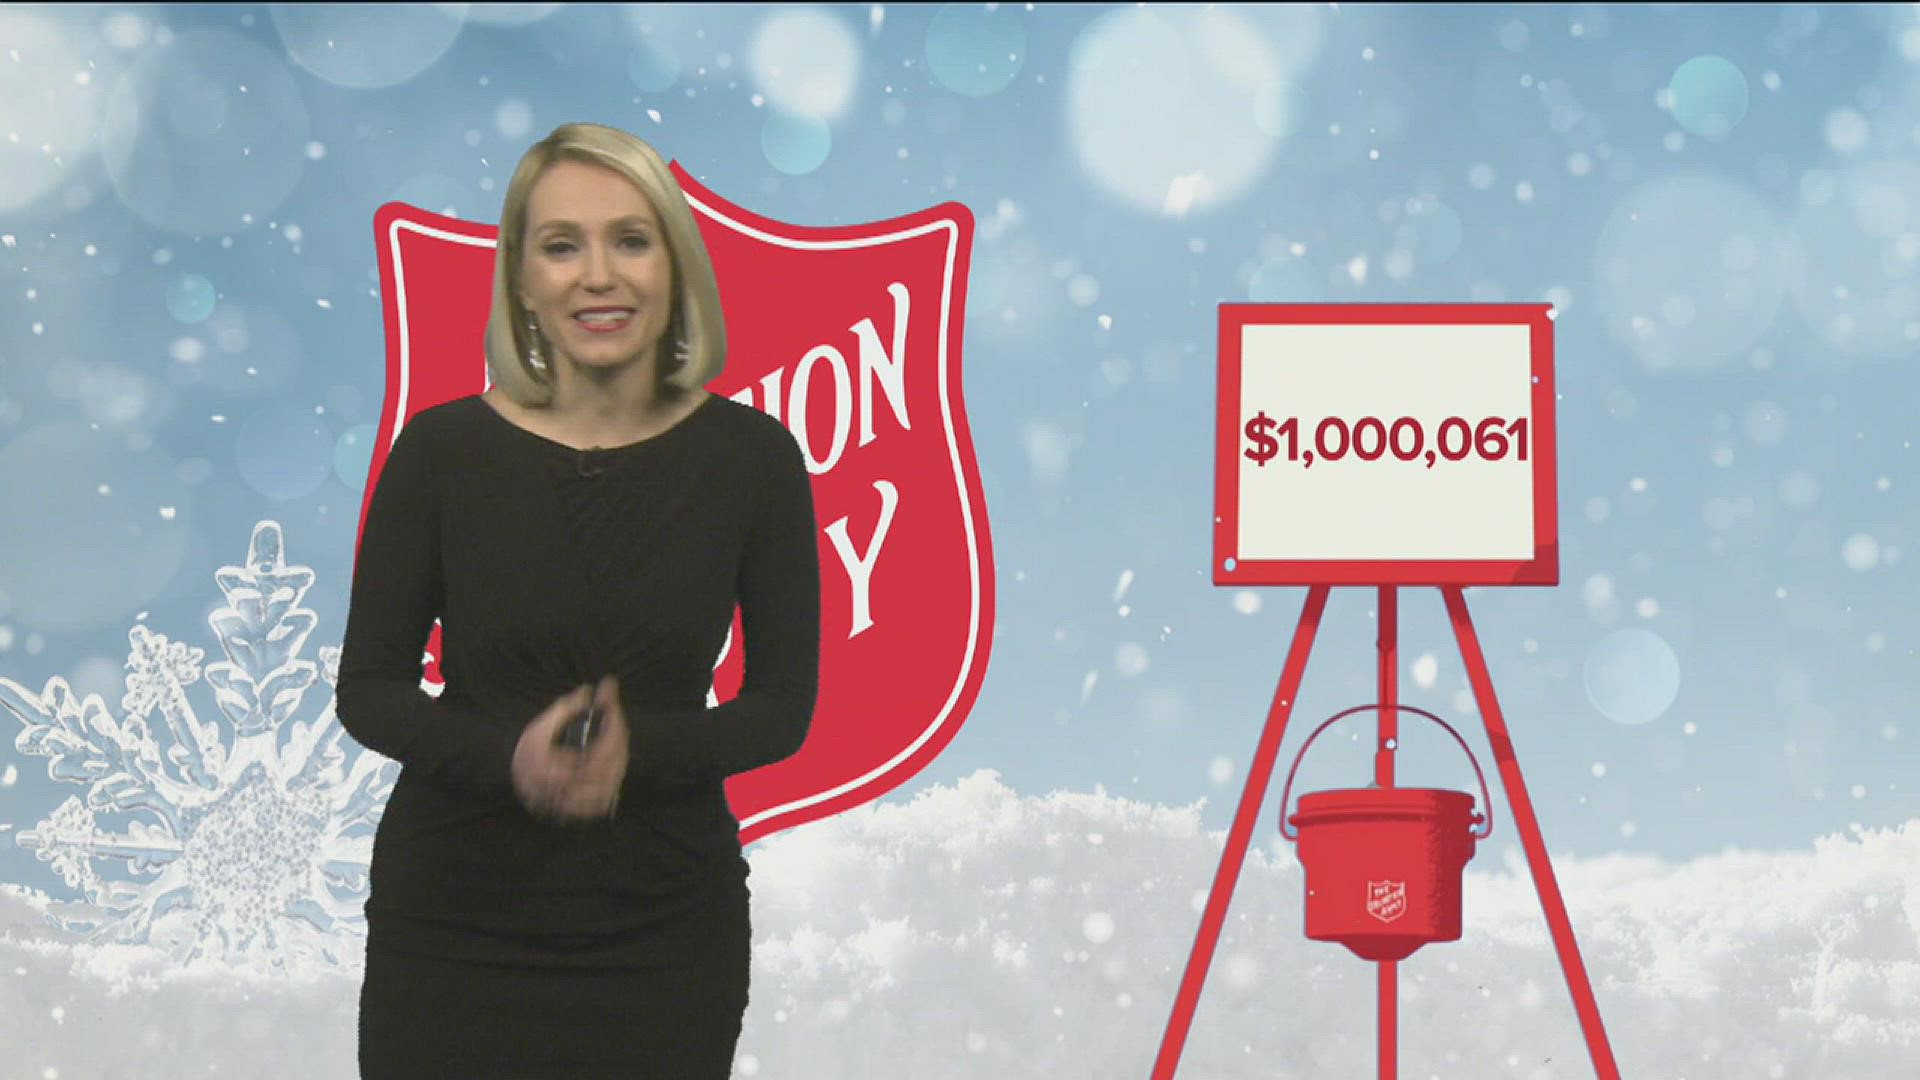 The Salvation Army is hoping to raise $1 million this holiday season to help Connecticut families in need.